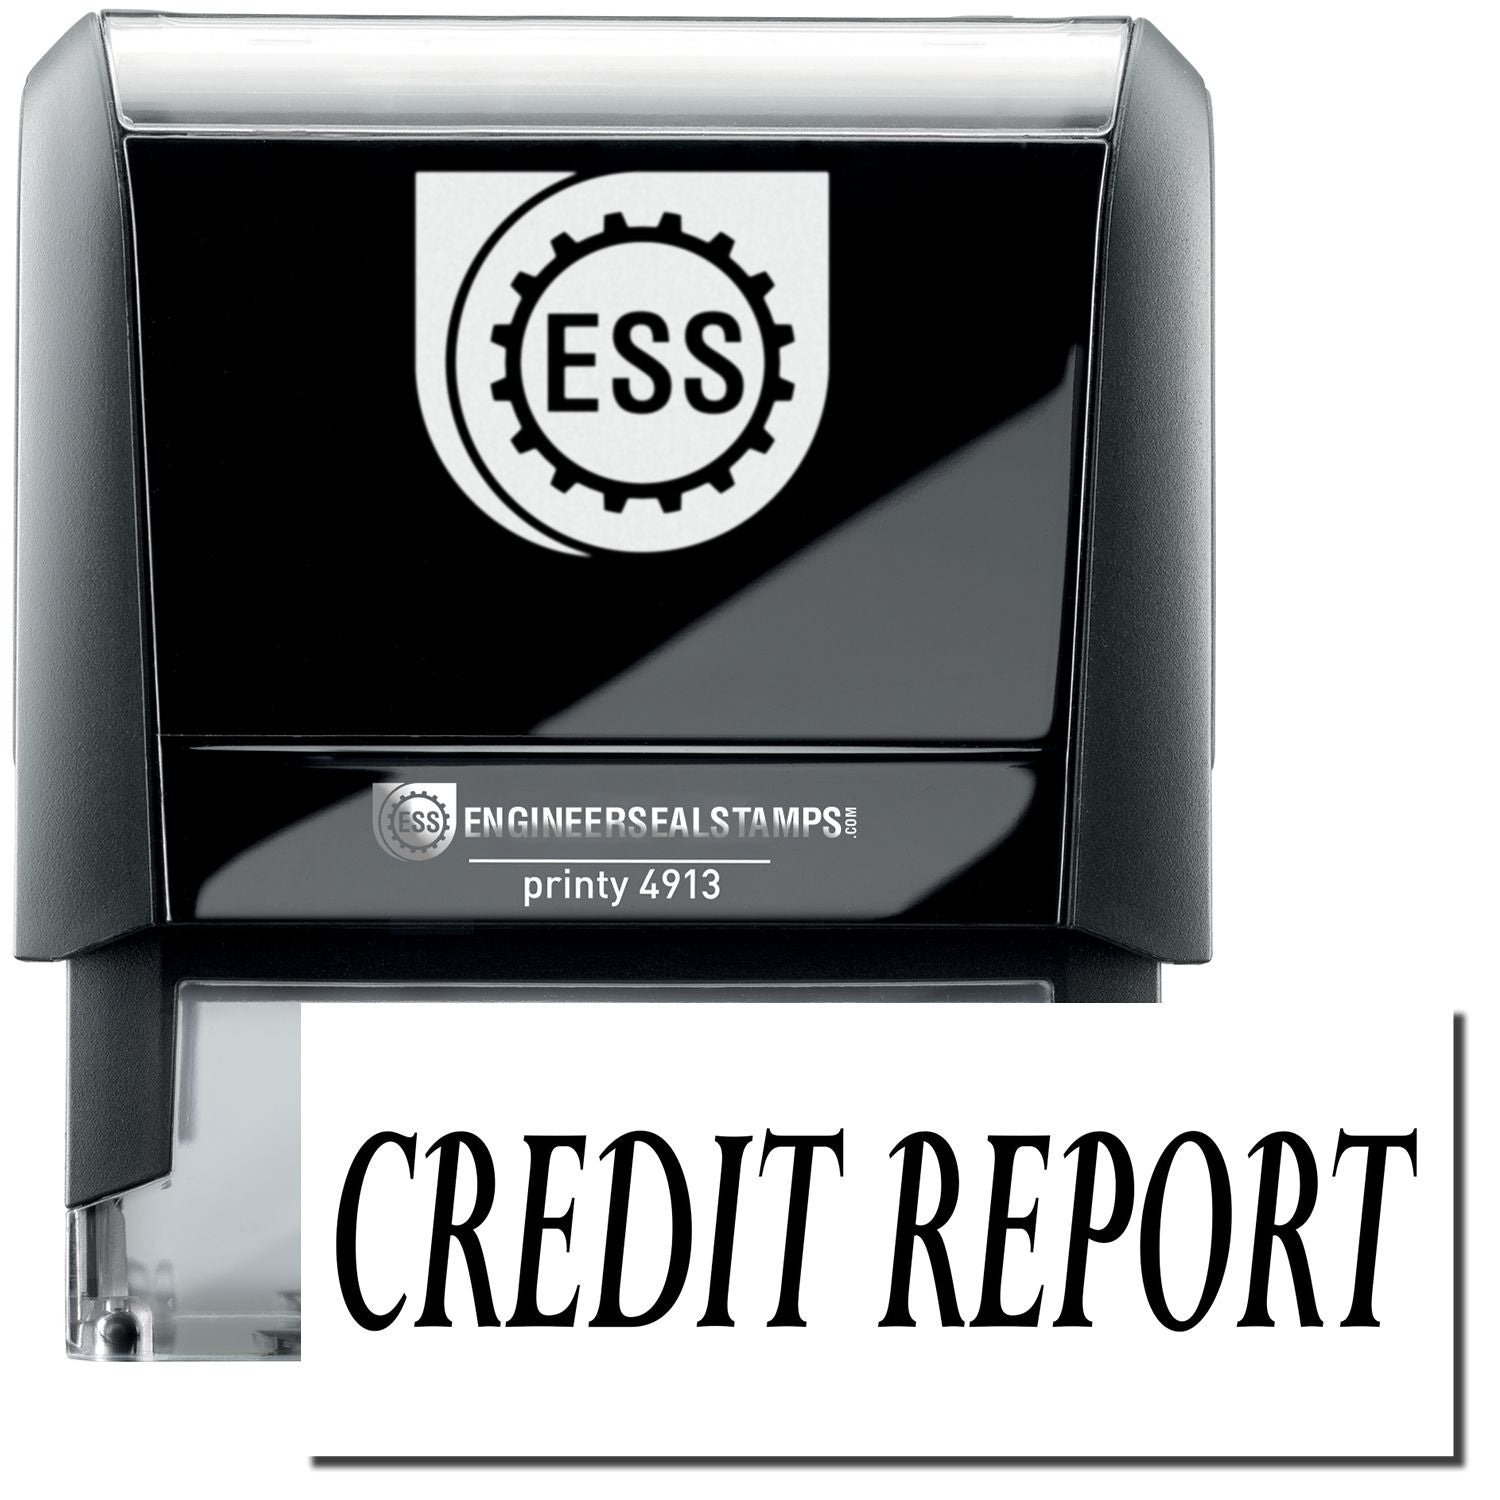 A self-inking stamp with a stamped image showing how the text "CREDIT REPORT" in a large bold font is displayed by it.